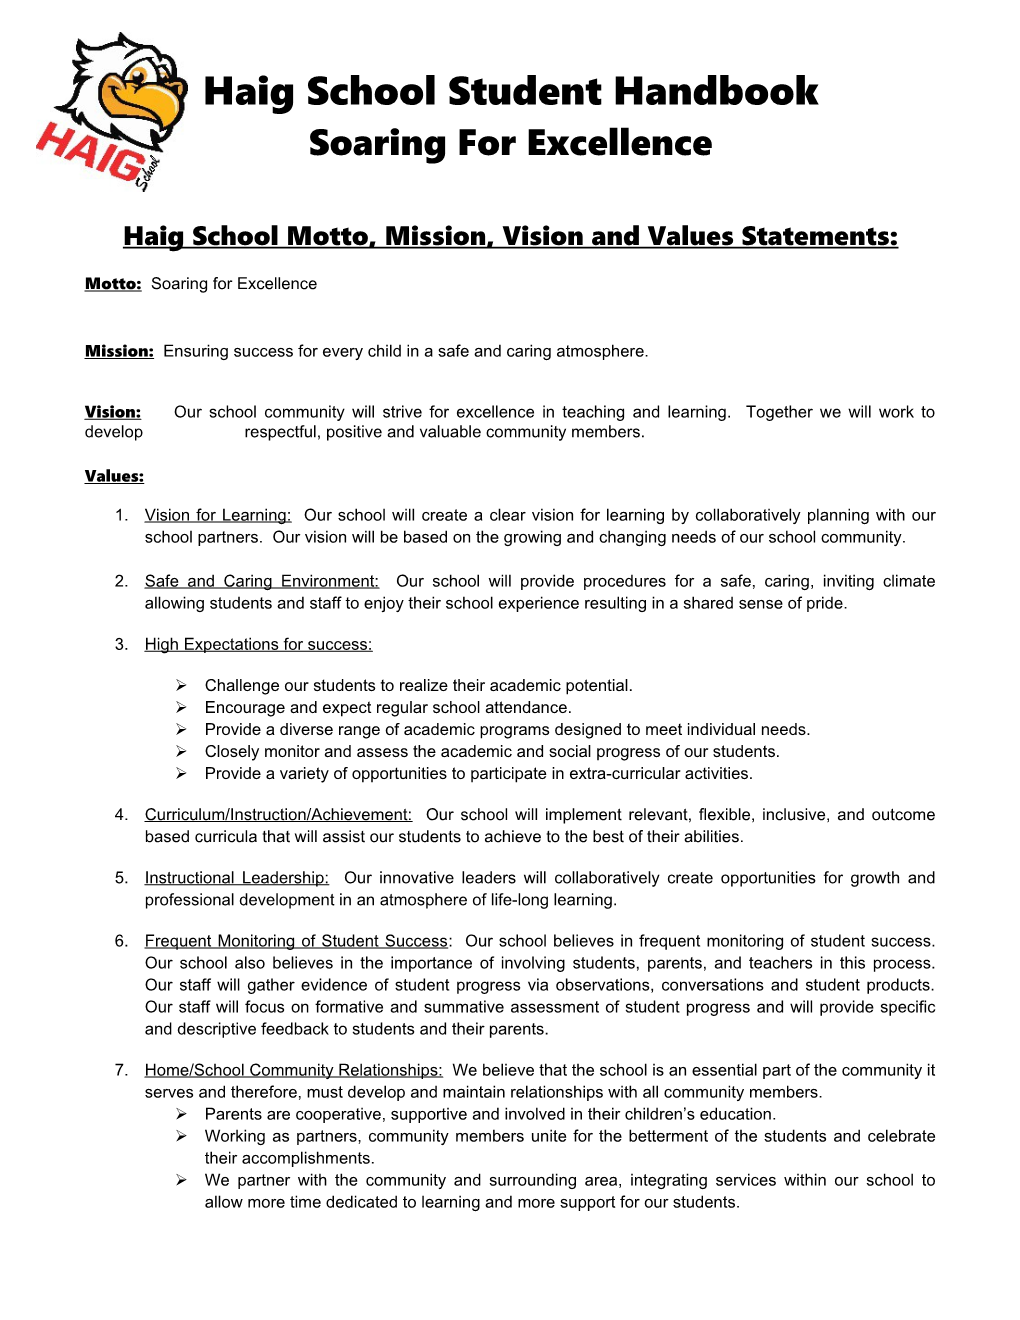 Haig School Motto, Mission, Vision and Values Statements